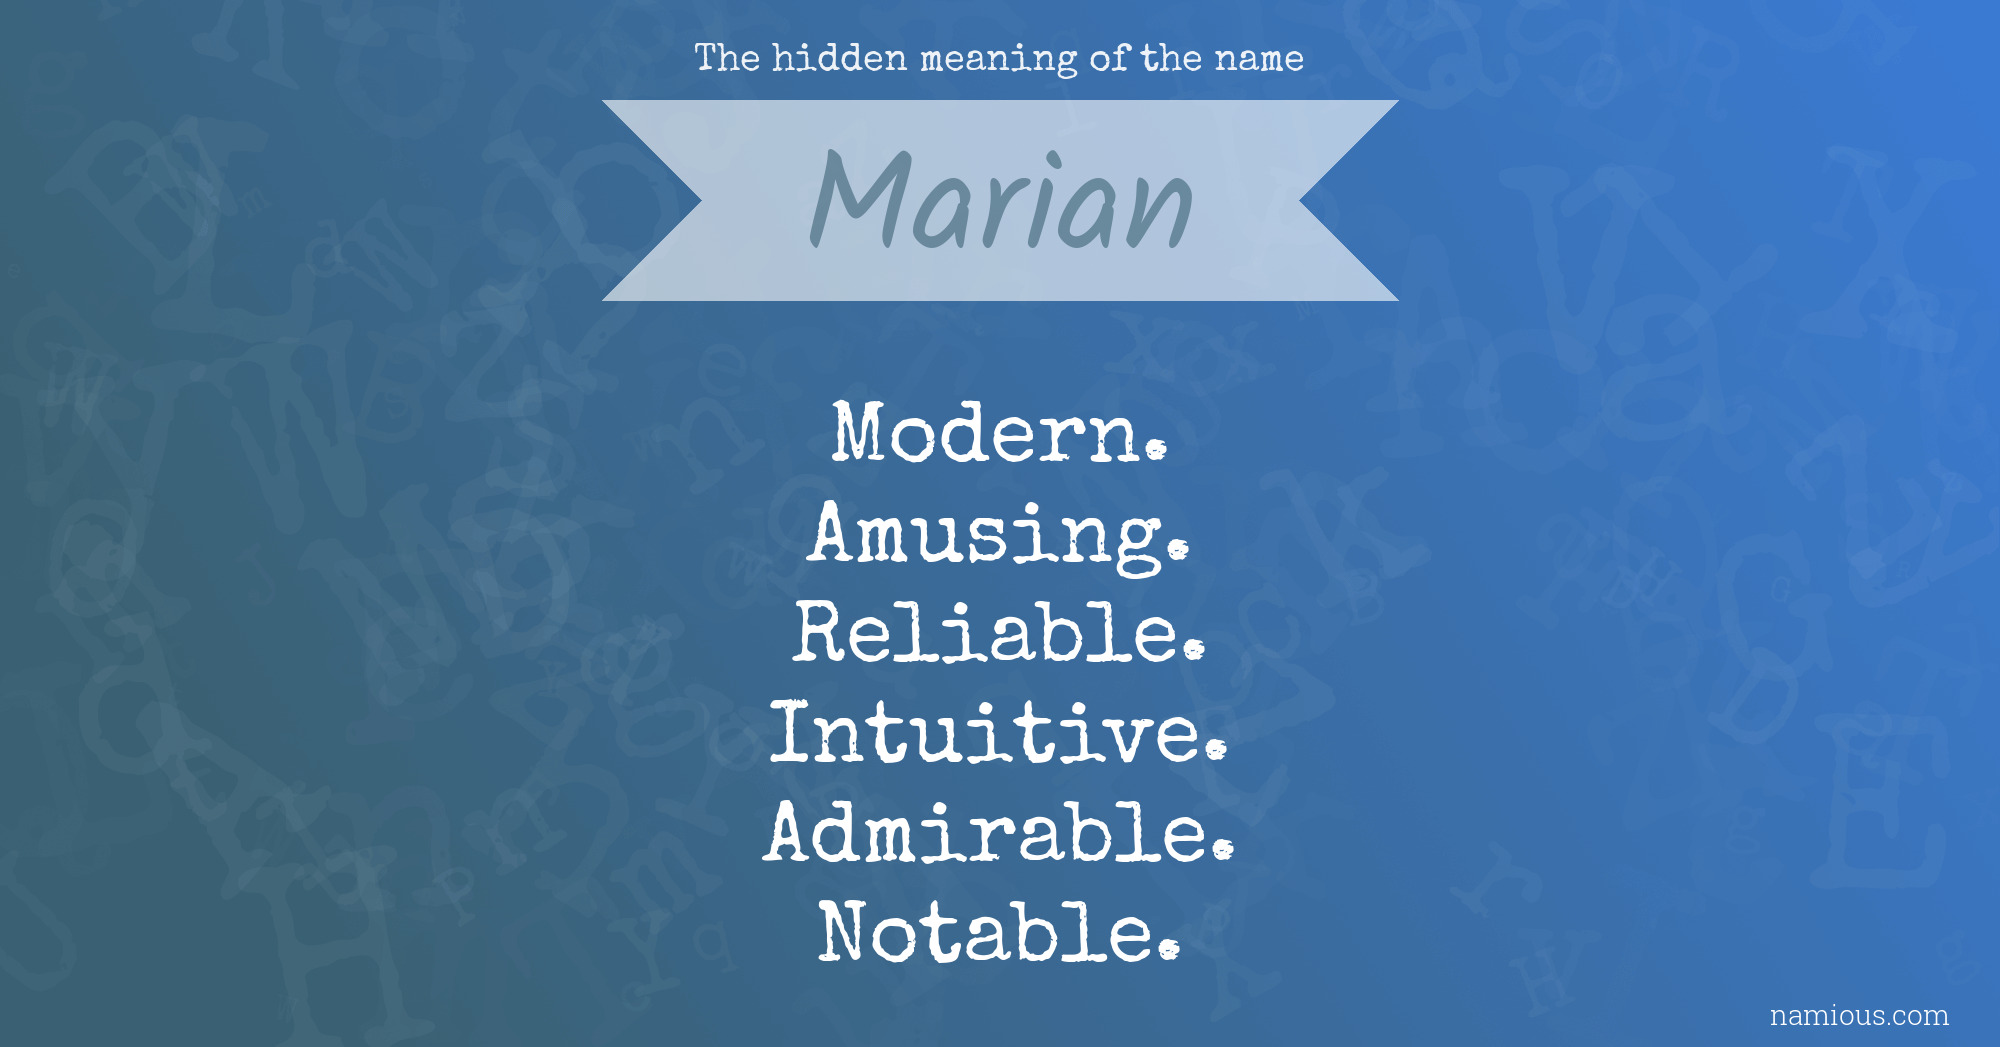 The hidden meaning of the name Marian